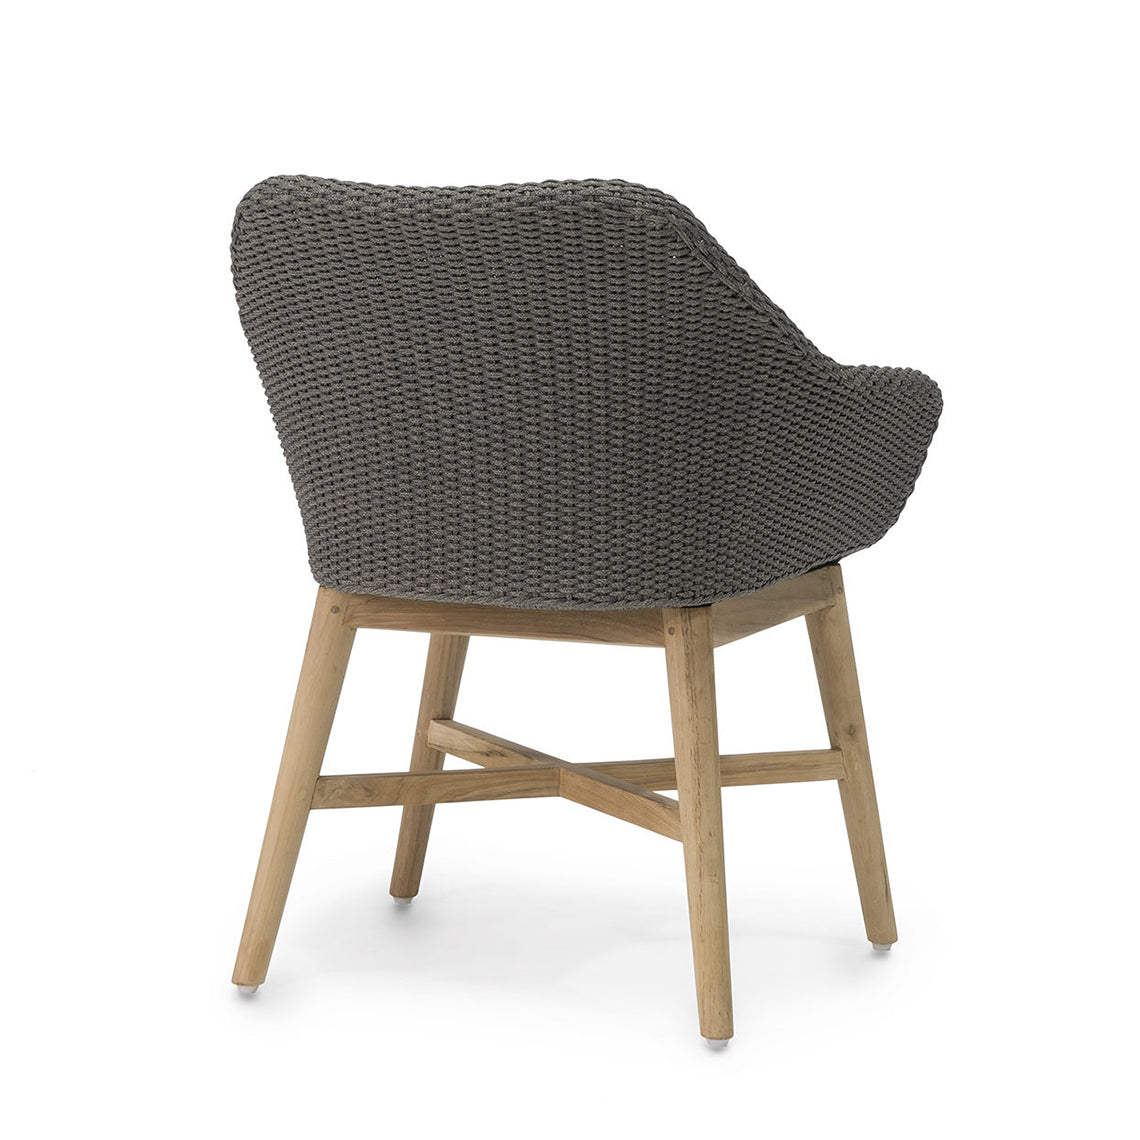 San Remo Outdoor Dining Chair